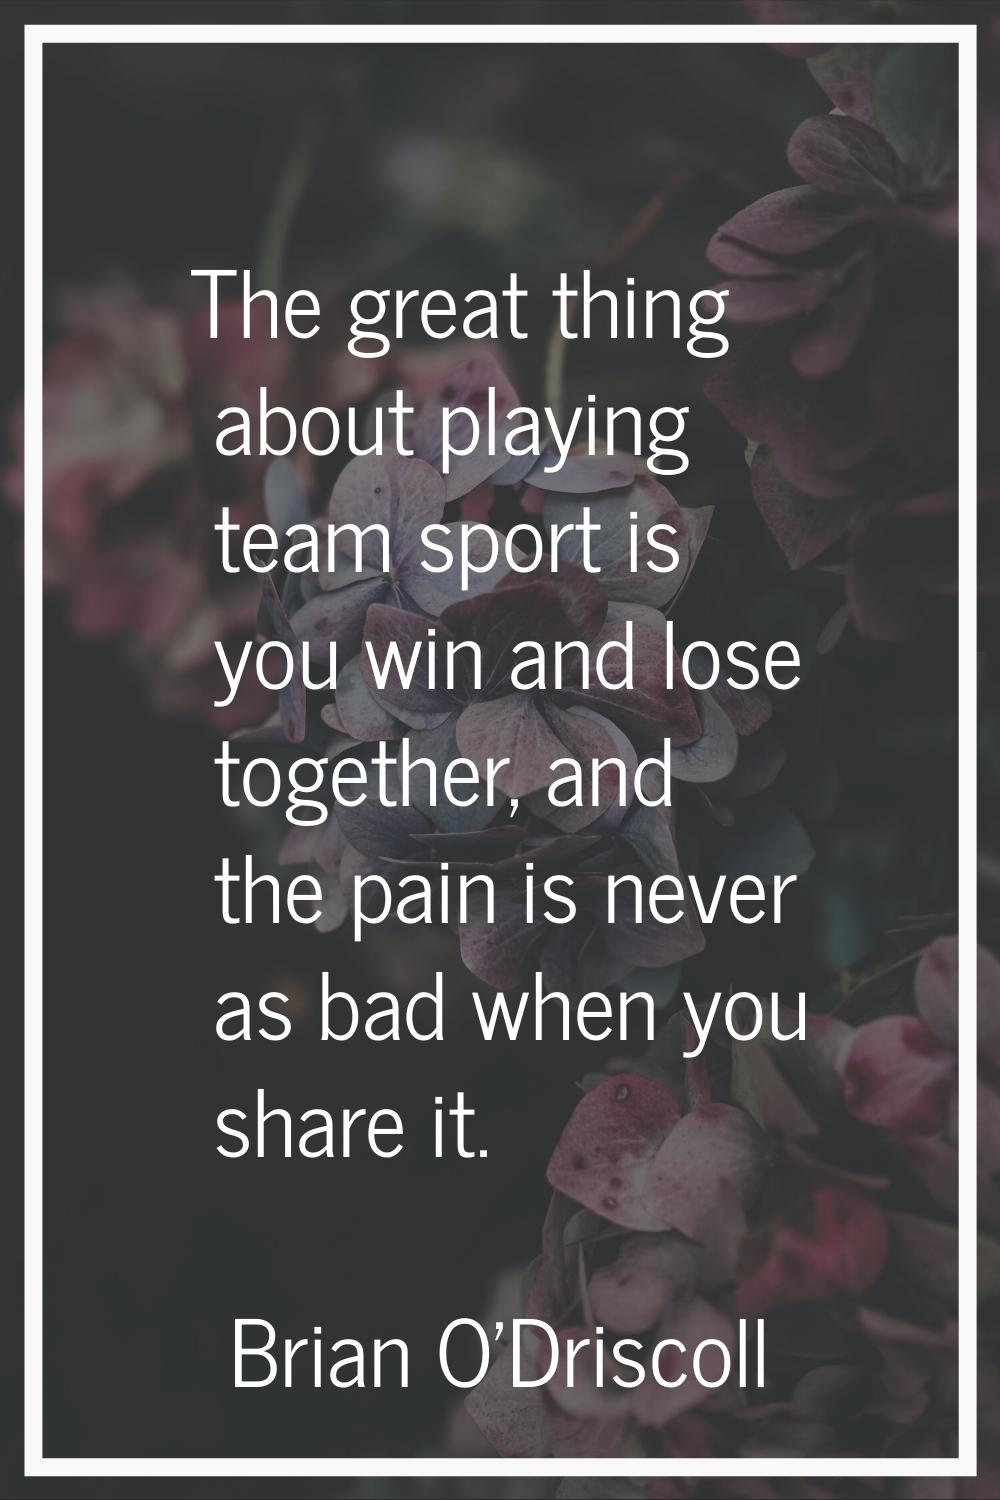 The great thing about playing team sport is you win and lose together, and the pain is never as bad